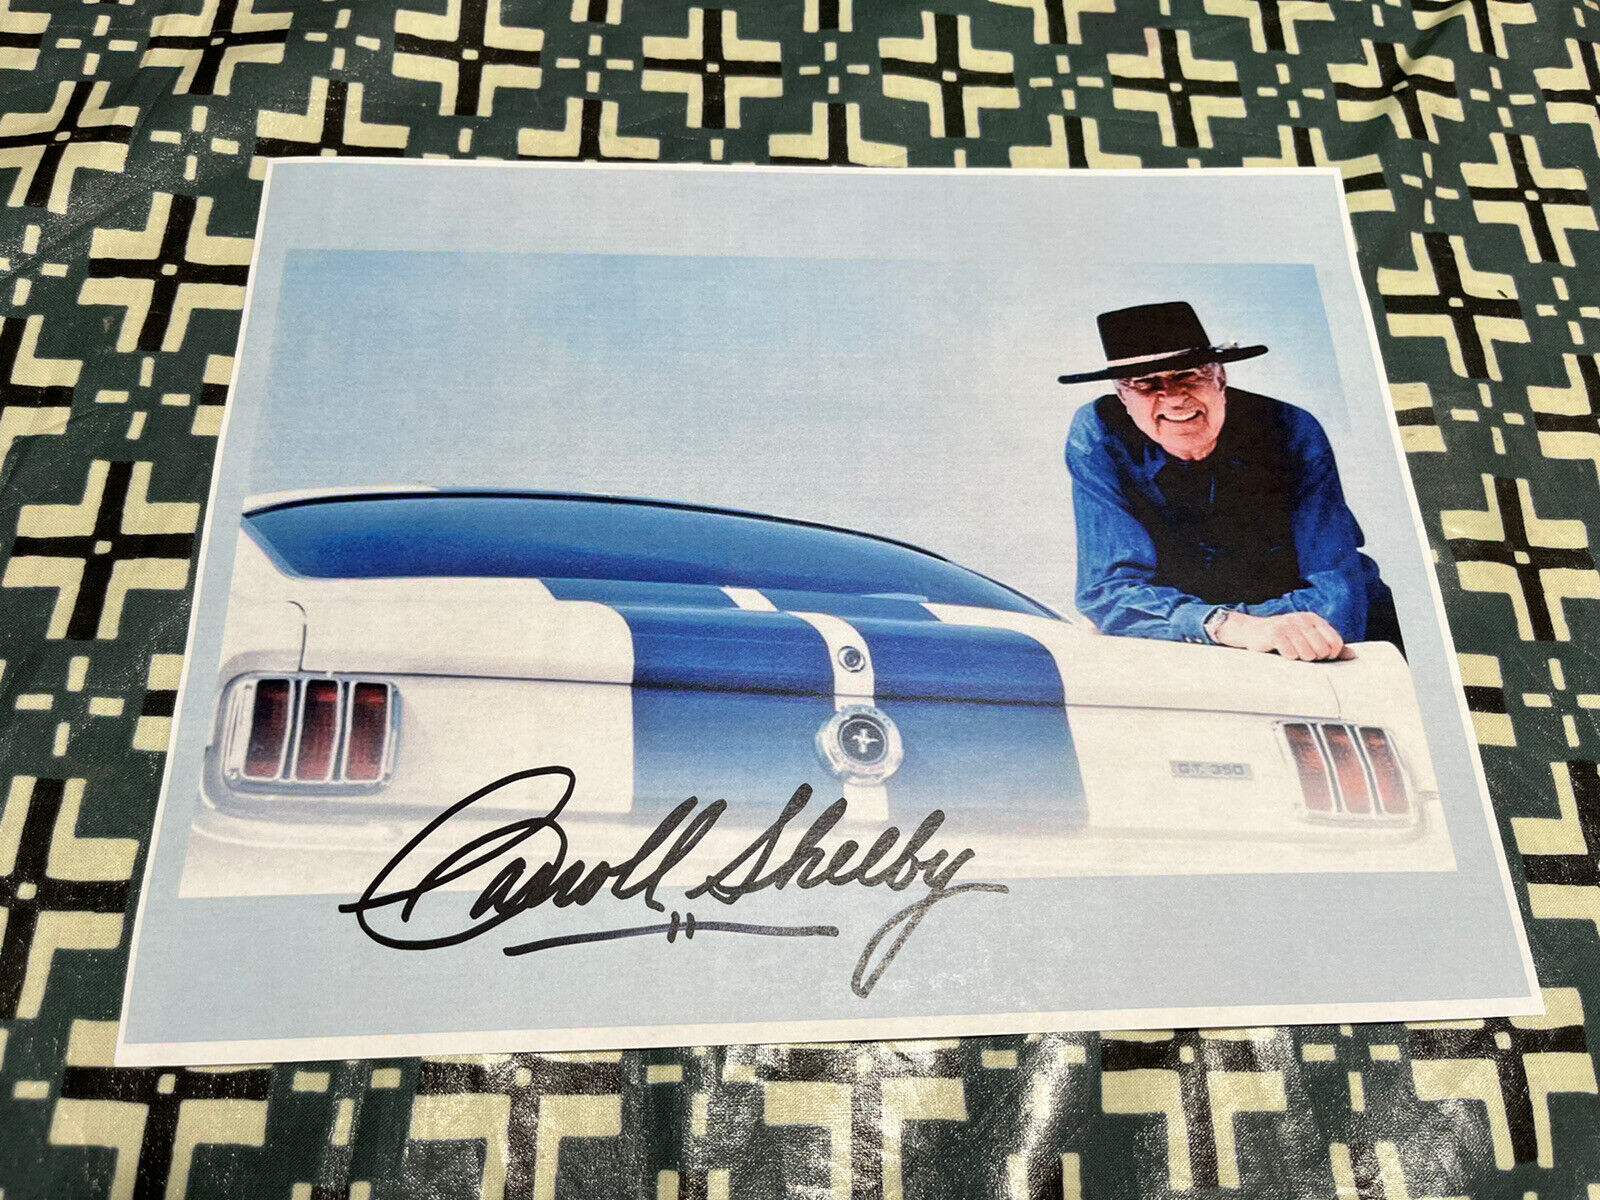 Carroll Shelby SIGNED PHOTOGRAPH WITH ORIGINAL GT350 FORD MUSTANG VERY COOL NOW